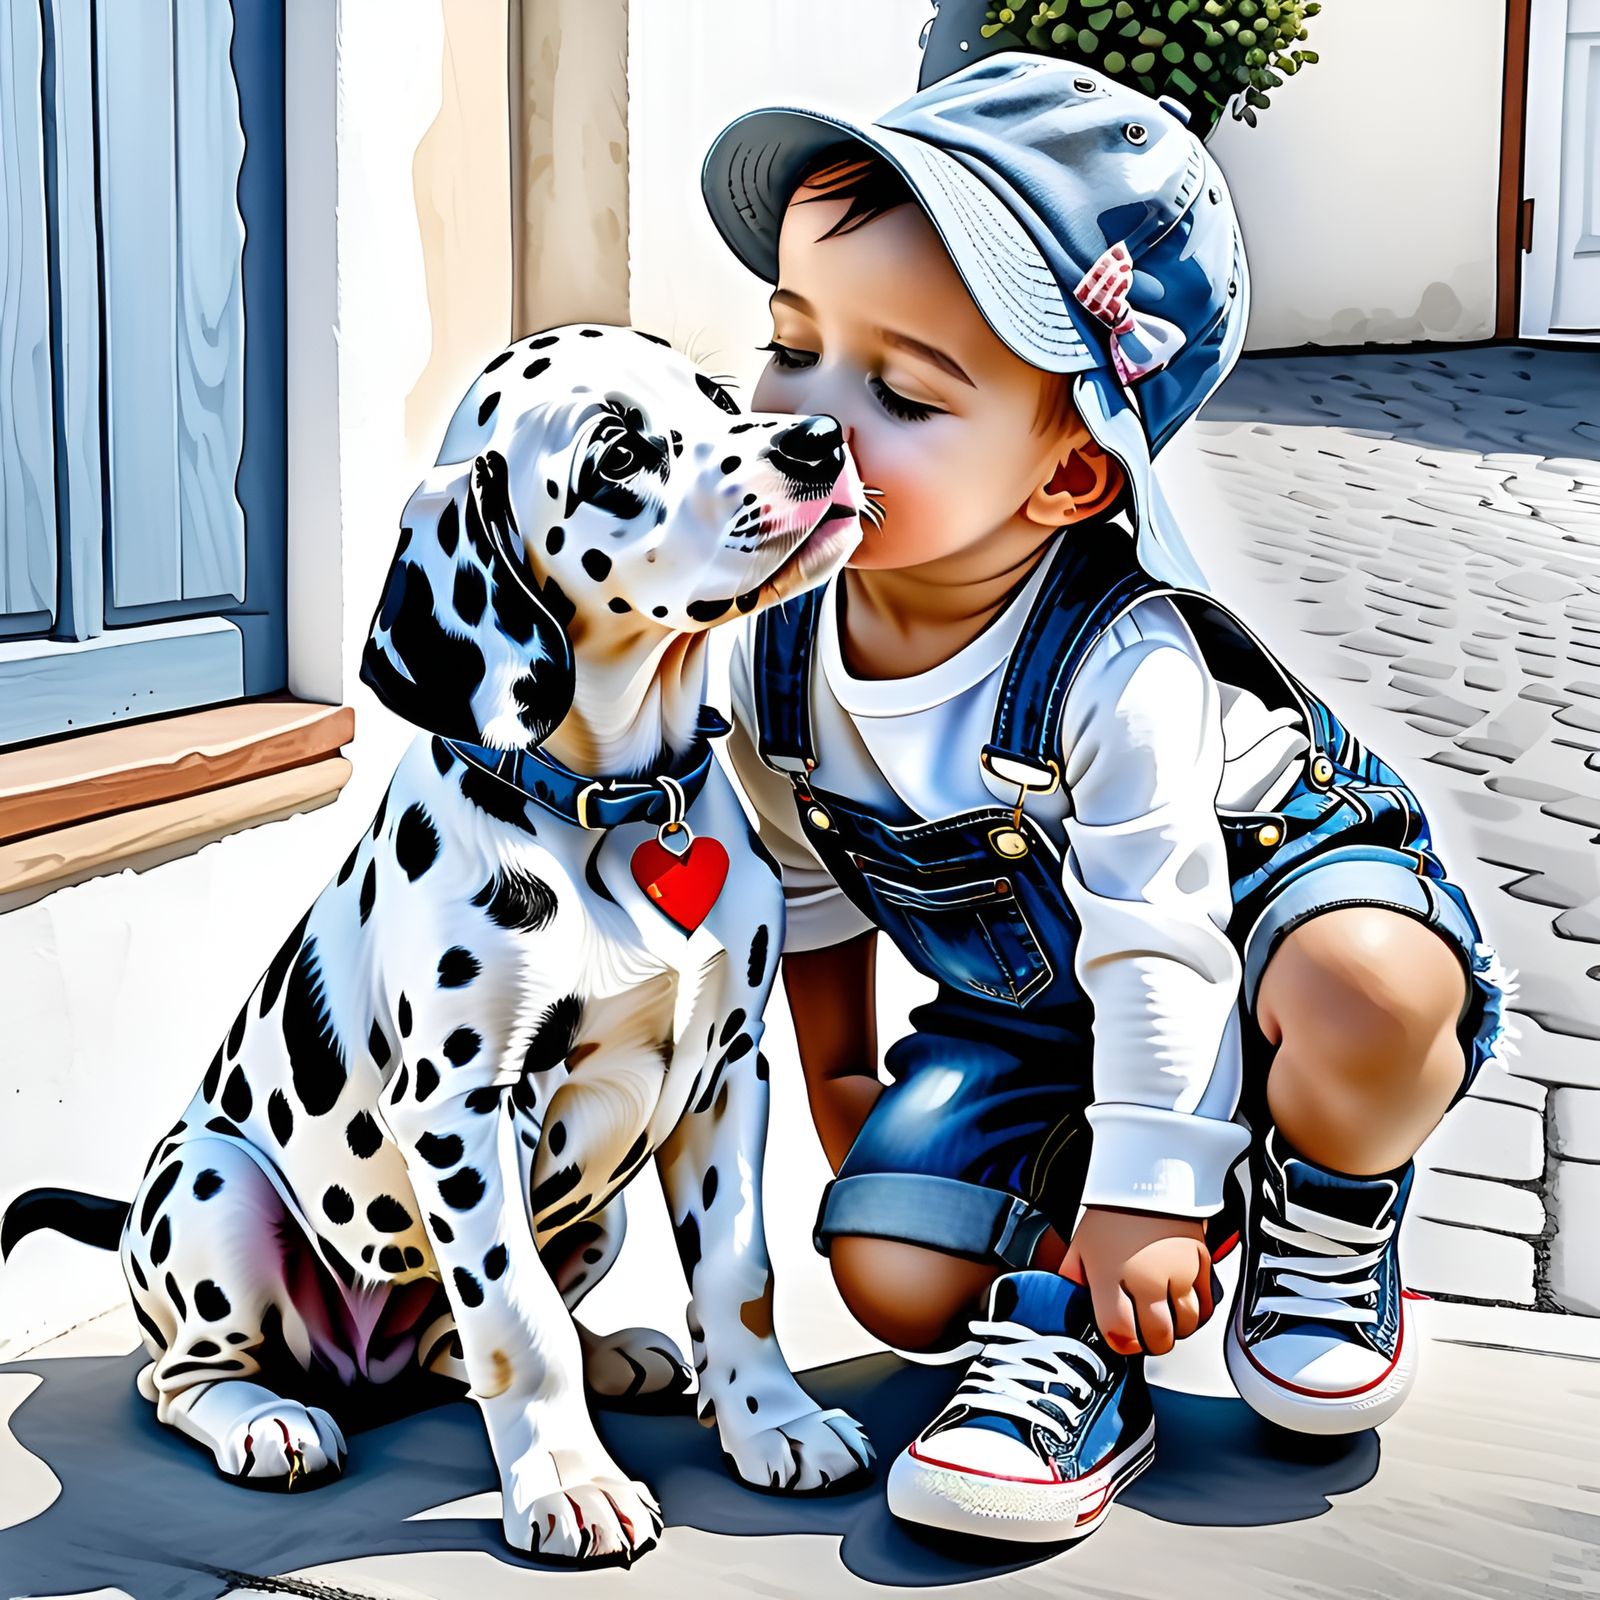 Toddler kissing a dog - evolved from original by WenZen